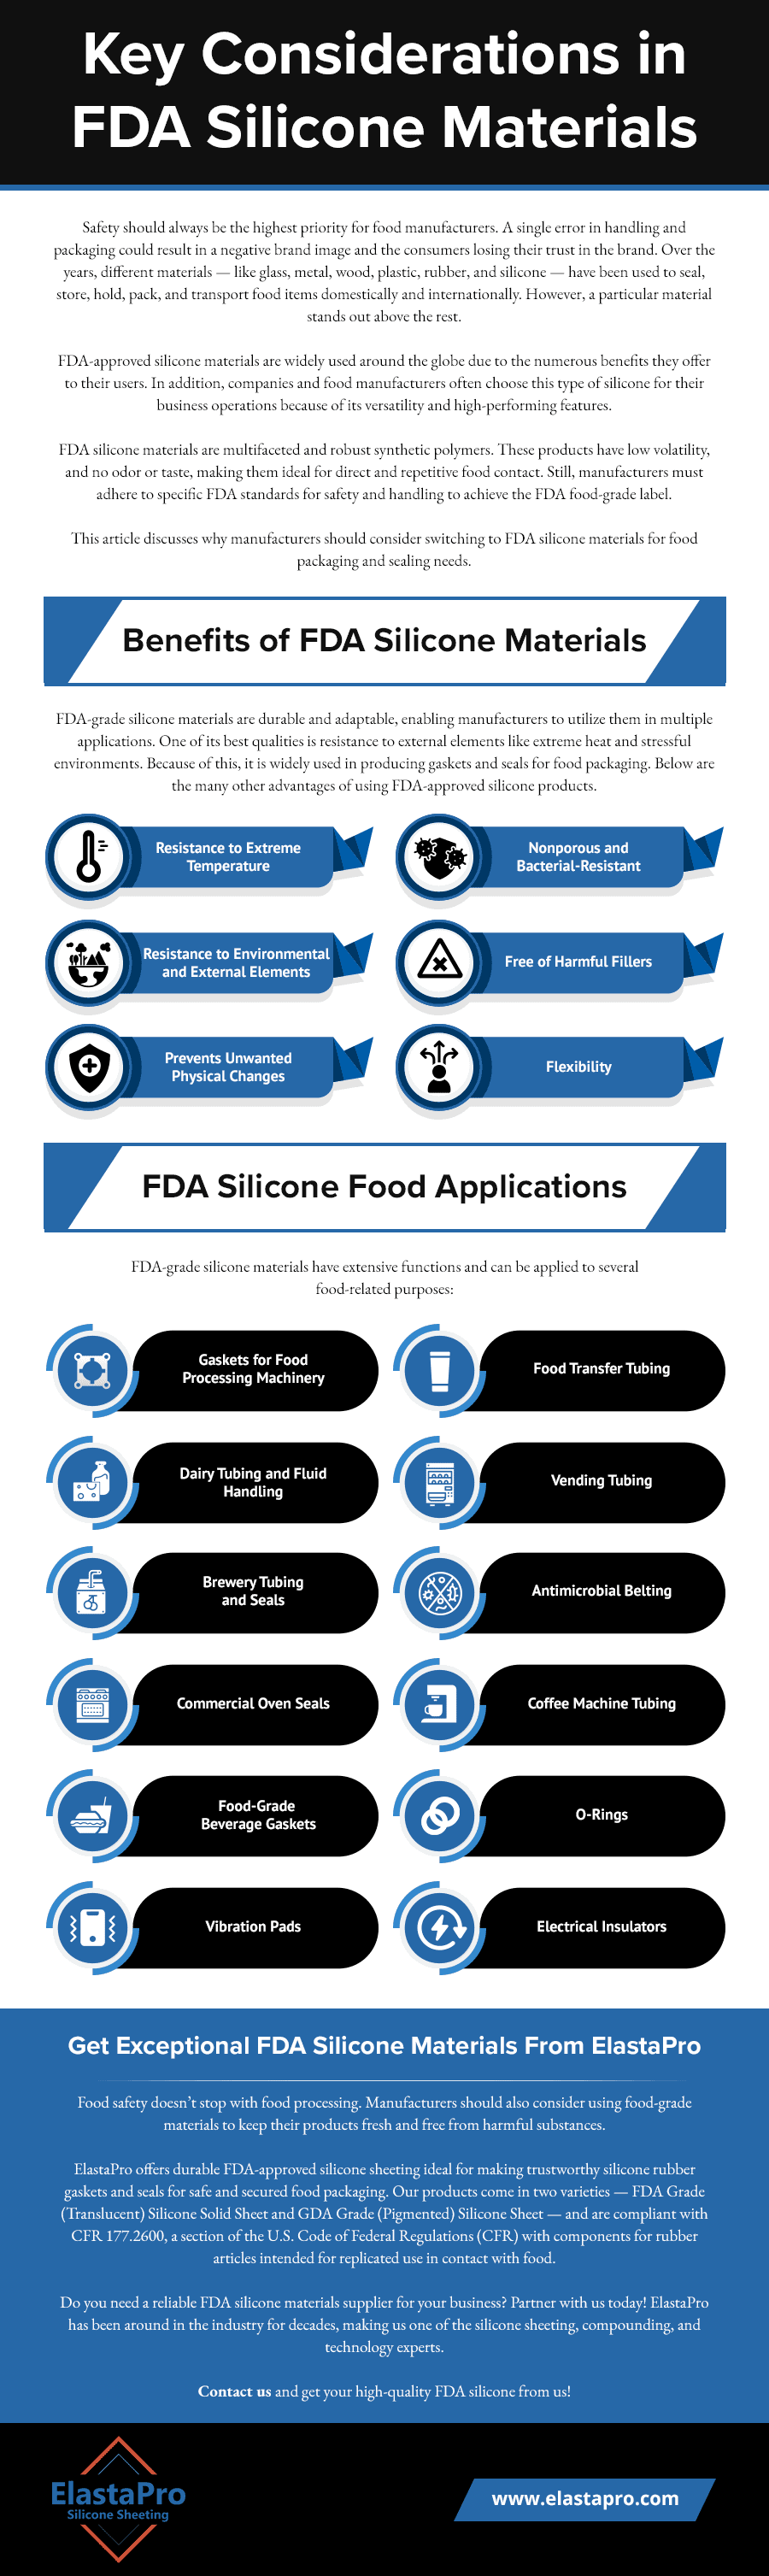 Key-Considerations-in-FDA-Silicone-Materials